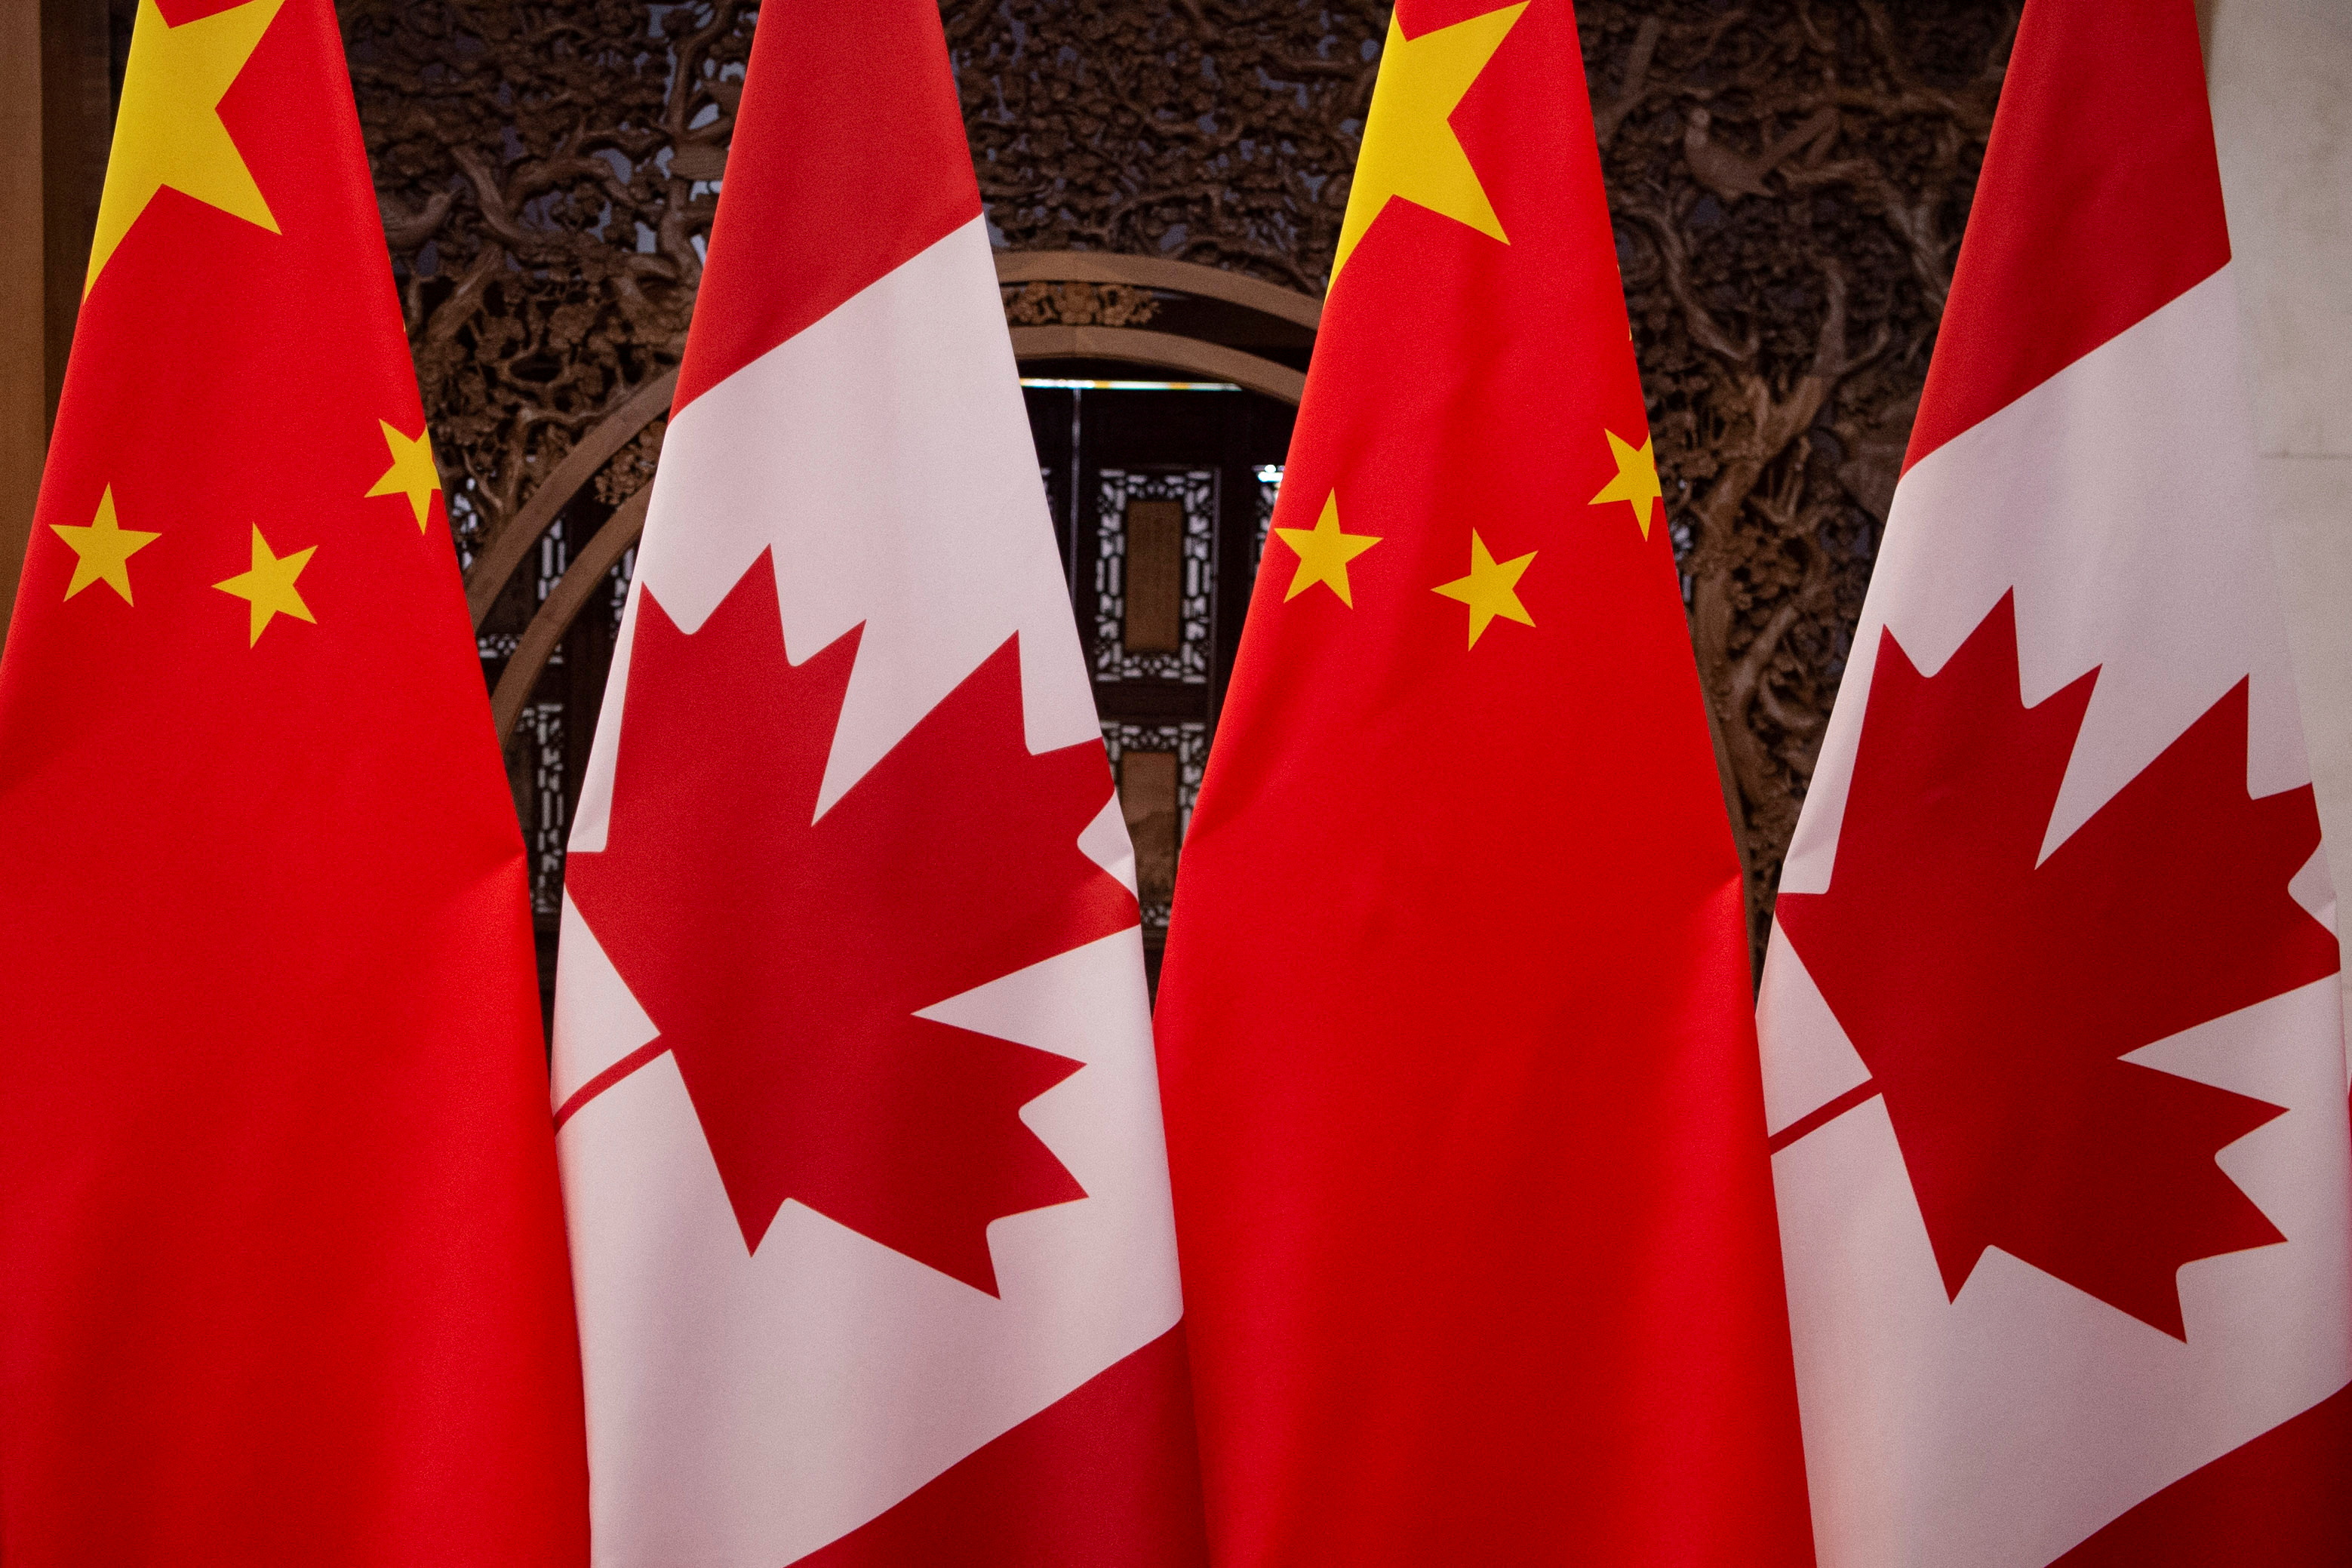 Picture of Canadian and Chinese flags taken prior to the meeting with Canada's Prime Minister Justin Trudeau and China's President Xi Jinping at the Diaoyutai State Guesthouse